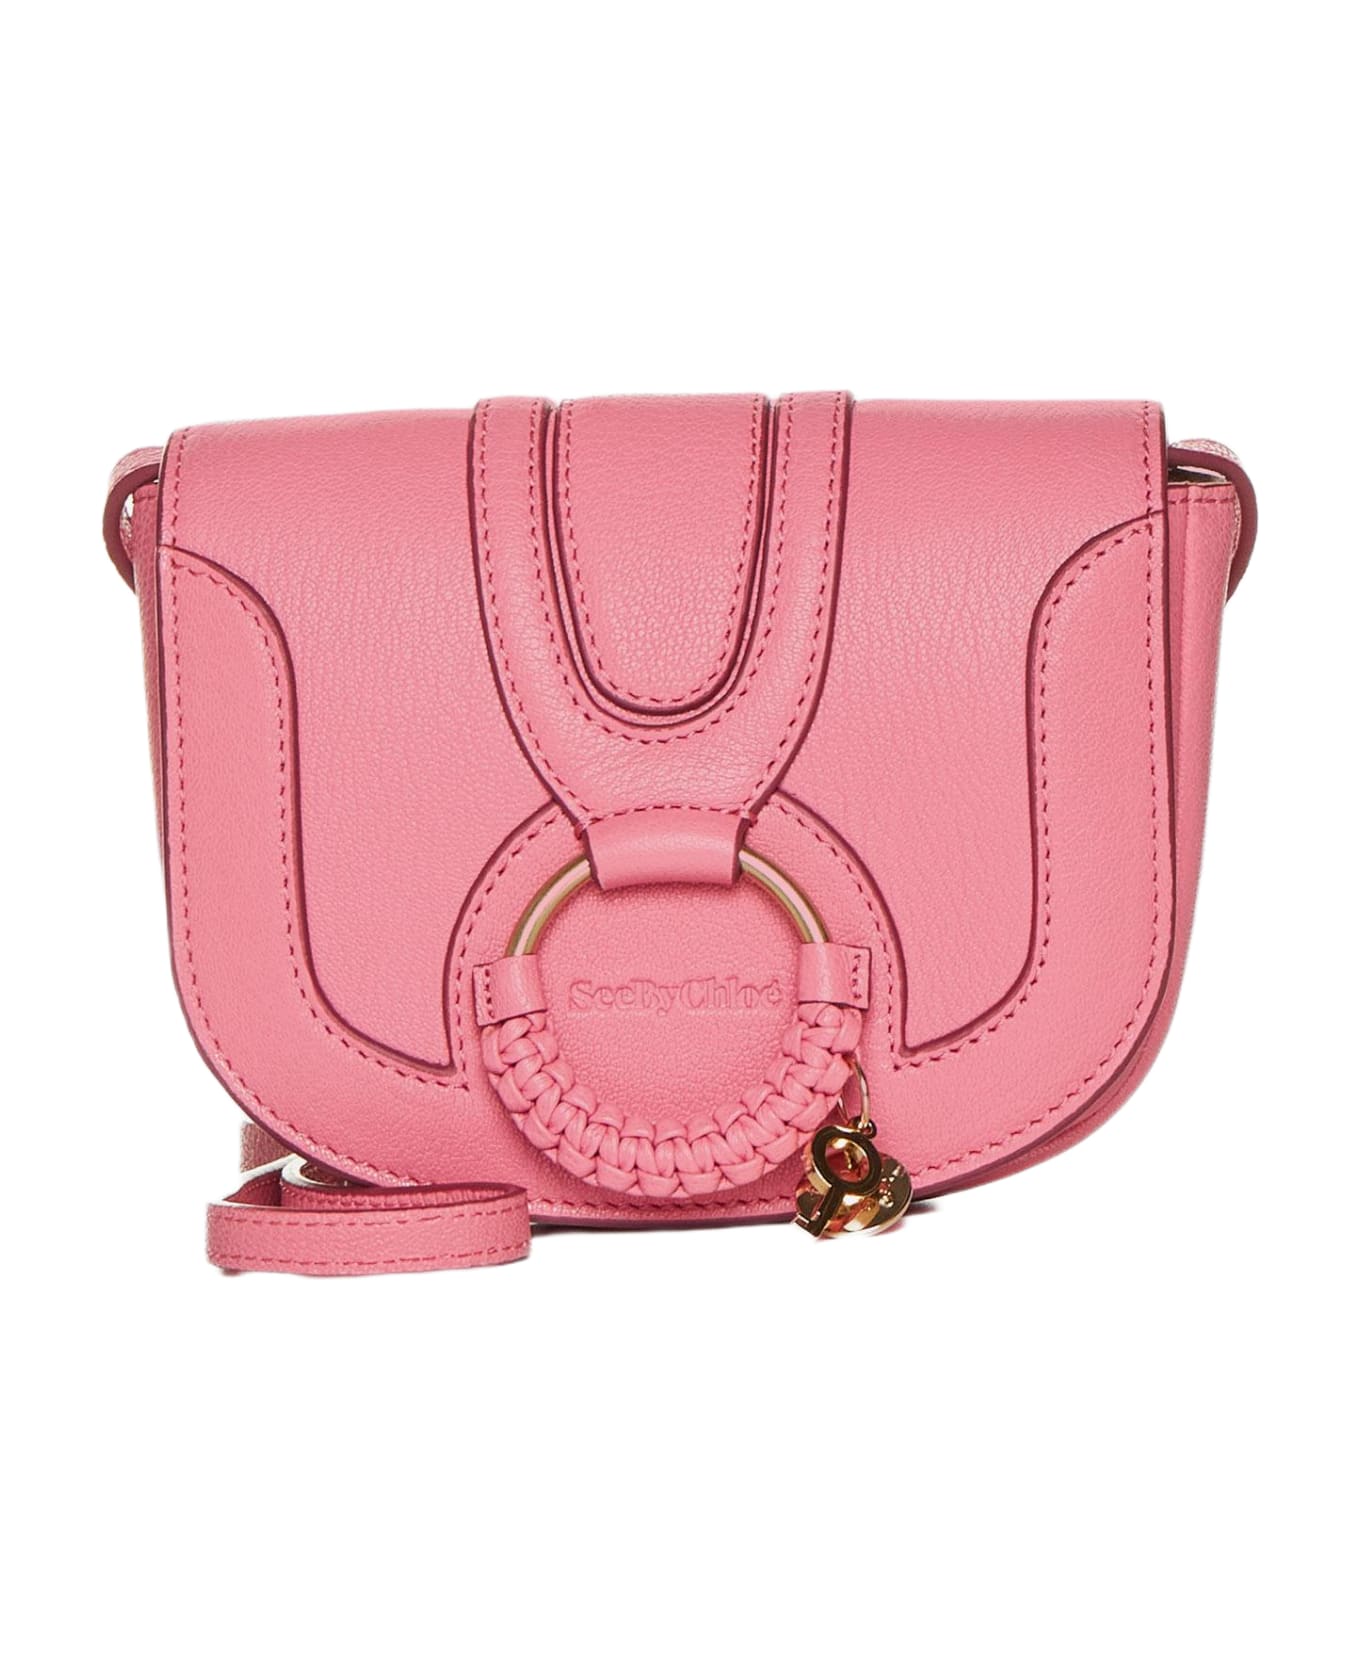 See by Chloé Hana Leather Bag - Pushy Pink トートバッグ